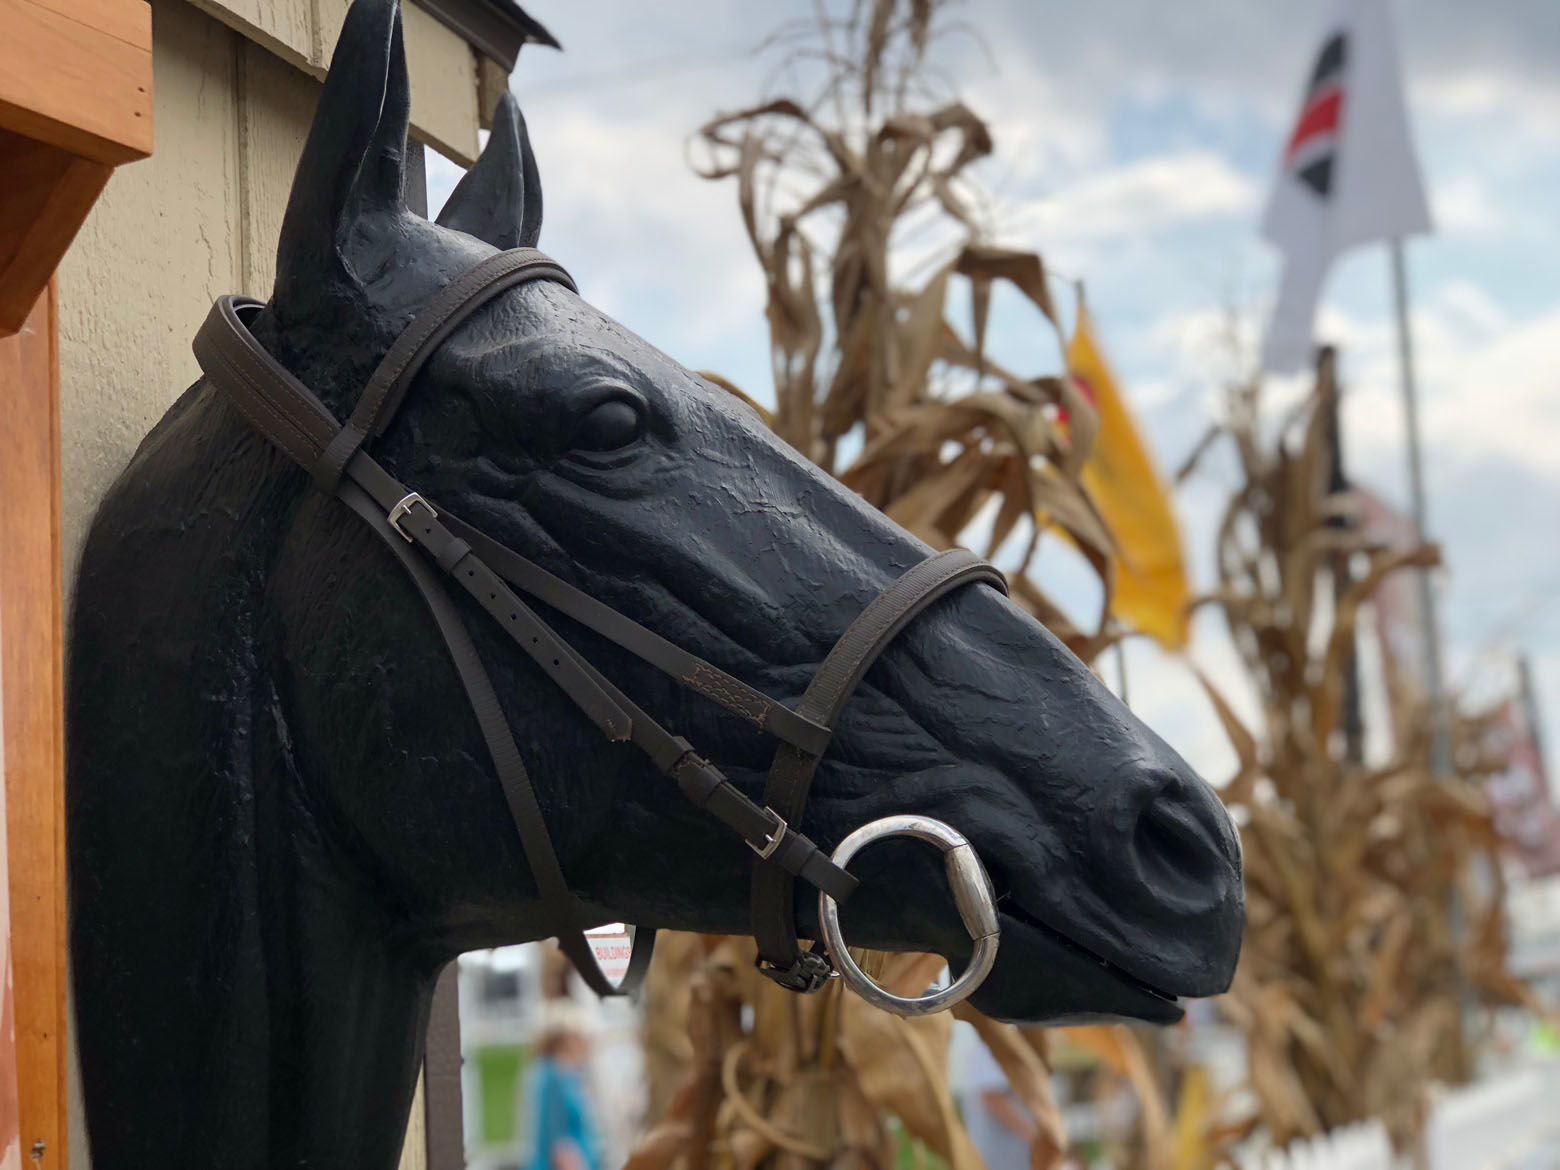 Detail of the equestrian display at the Great Frederick Fair. (WTOP/Kate Ryan)